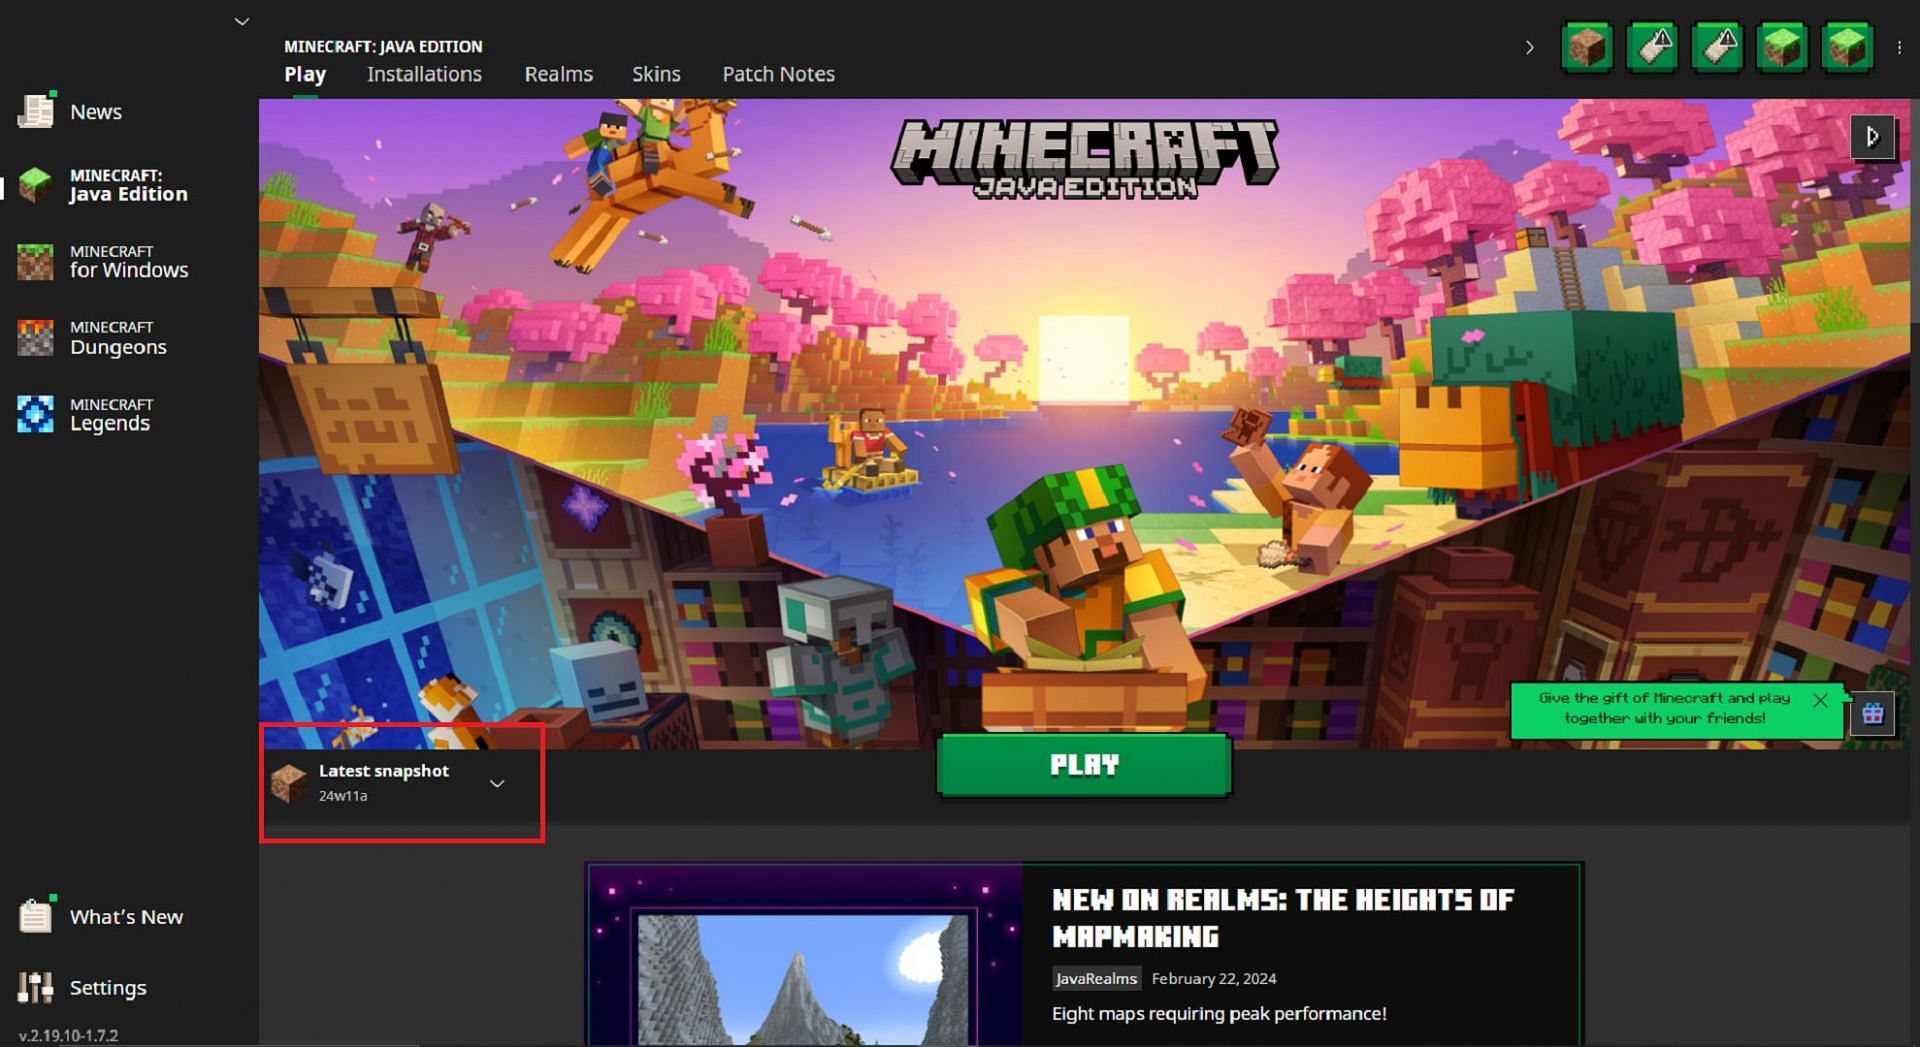 Minecraft Snapshot 24w11a downloads can be easily accessed via the official launcher (Image via Mojang)